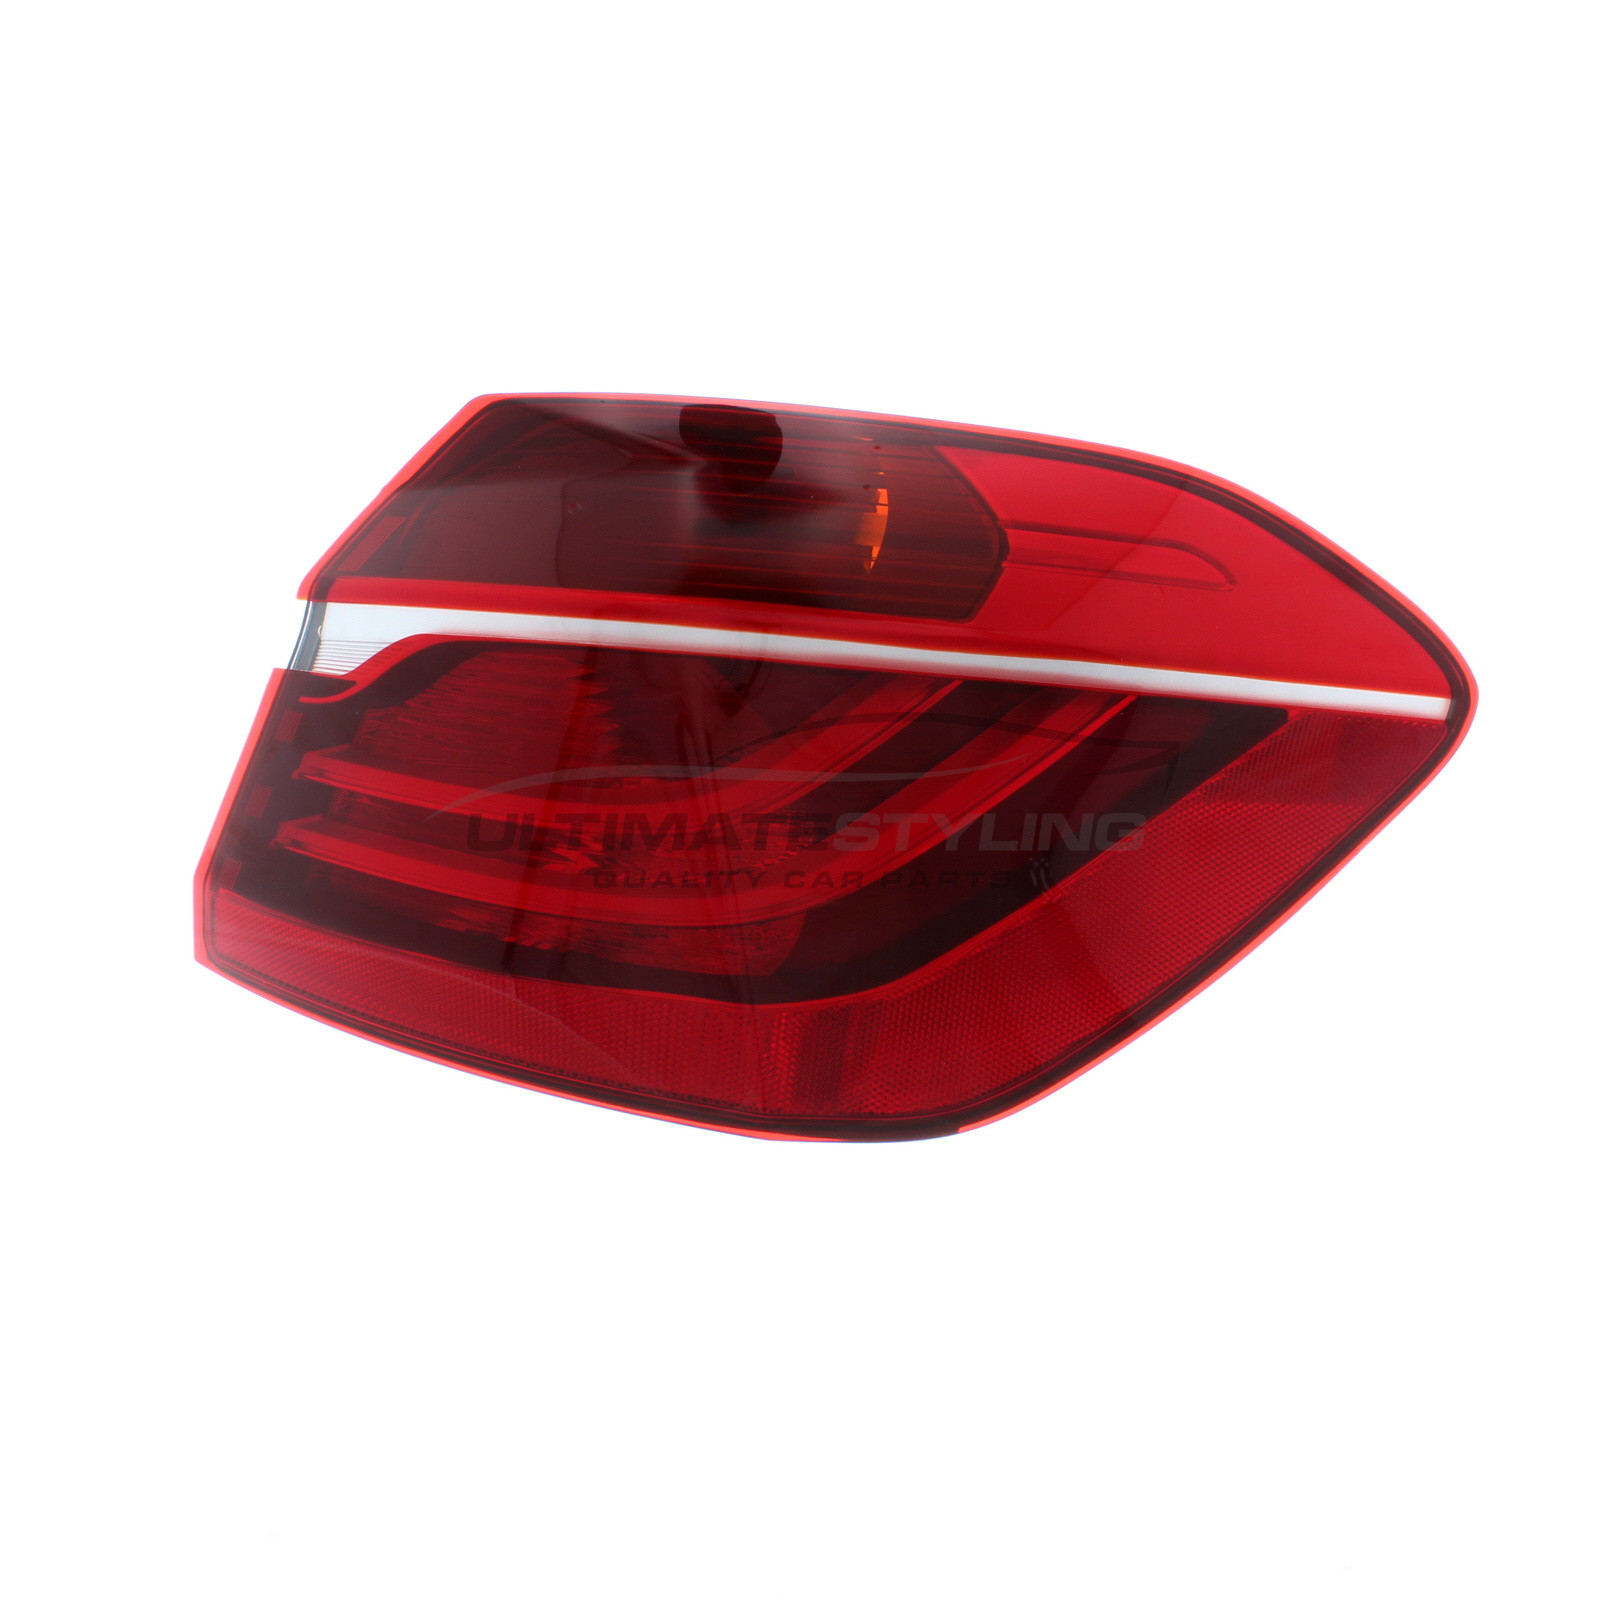 s Reference OE/OEM Number s R5W PY21W P21W x 3 Side Of Product Passenger Side Ultimate Styling Aftermarket Non-LED Rear Tail Light Lamp Without Bulb Holder Bulb Type LH 6350Y7 